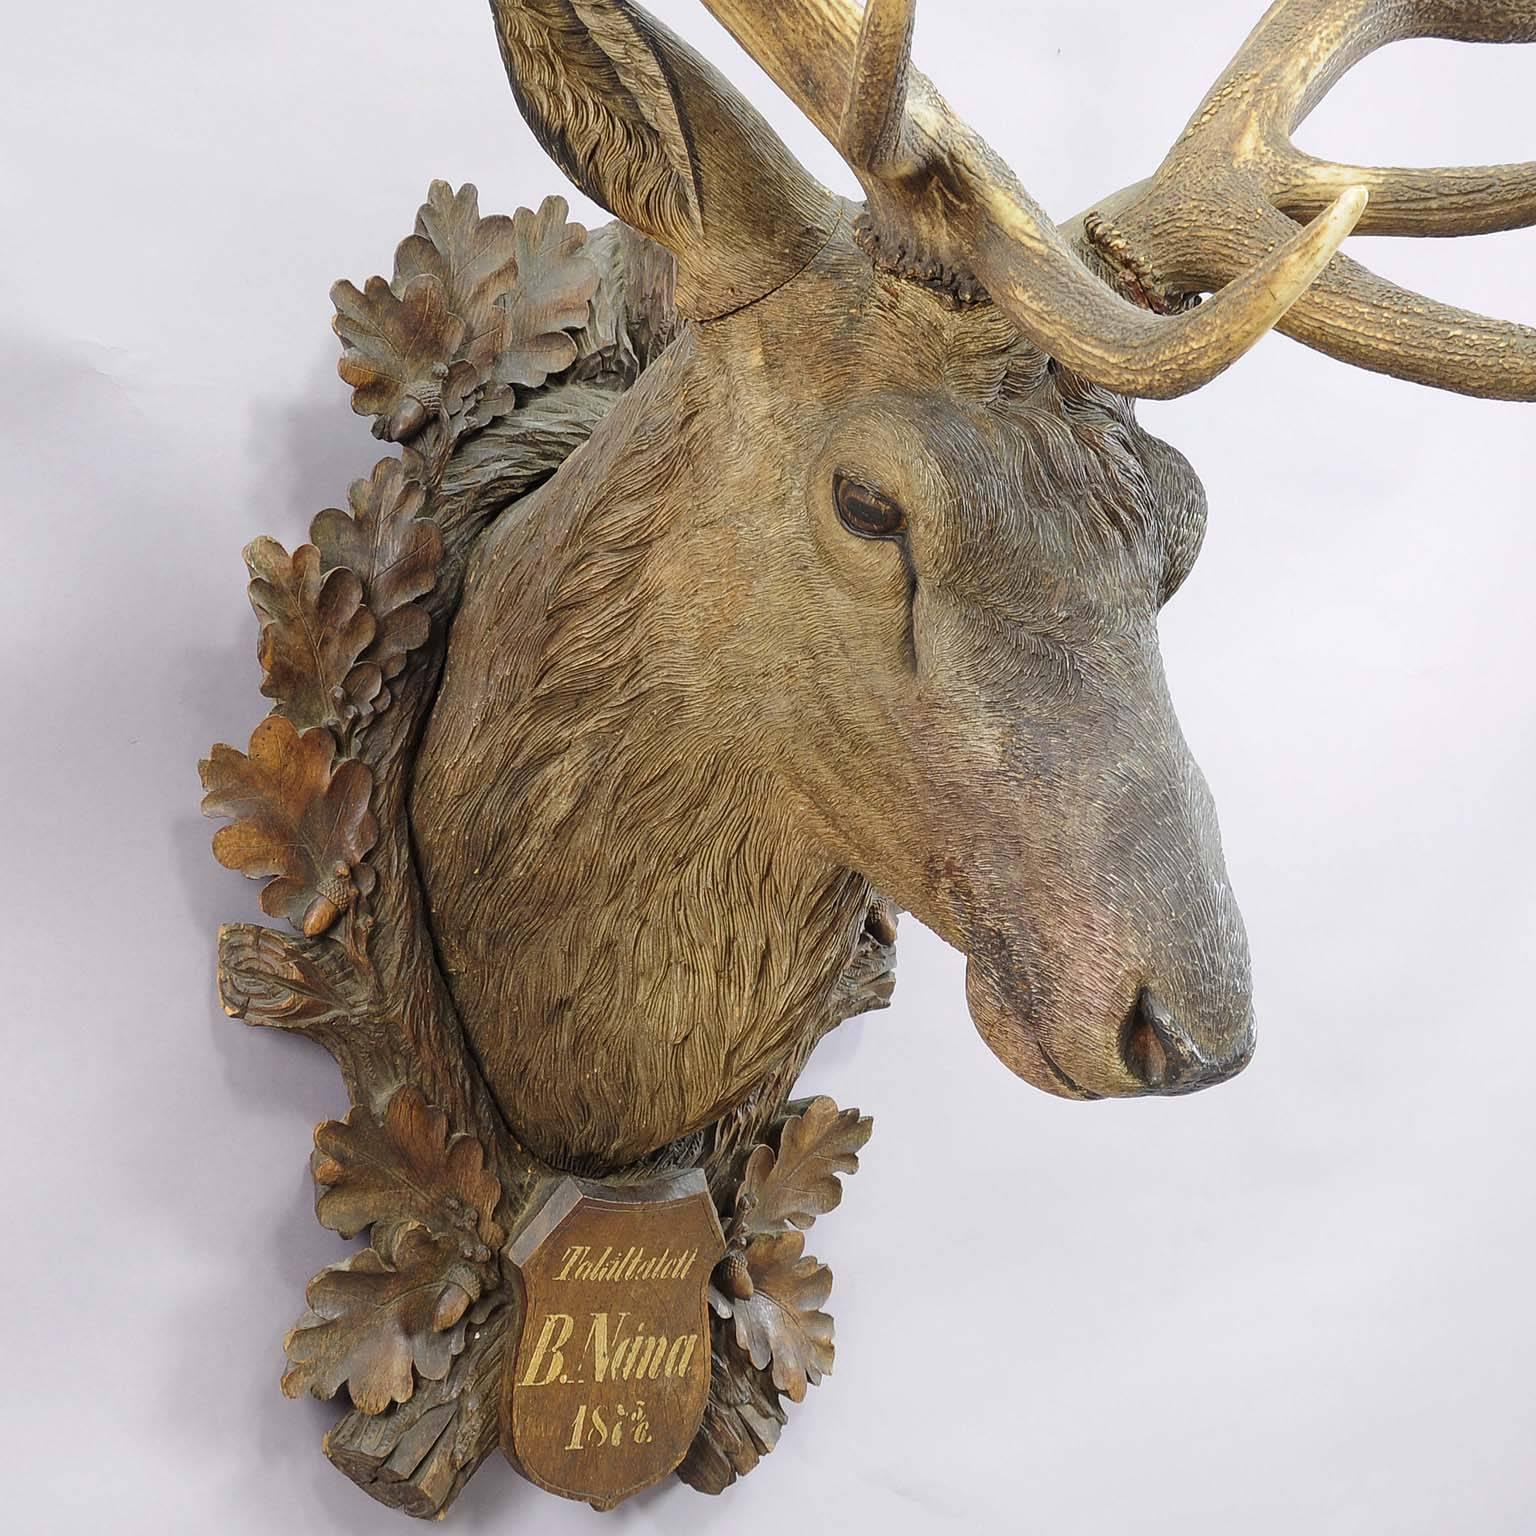 Black Forest Large Antique Wooden Carved Stag's Head by Heissl